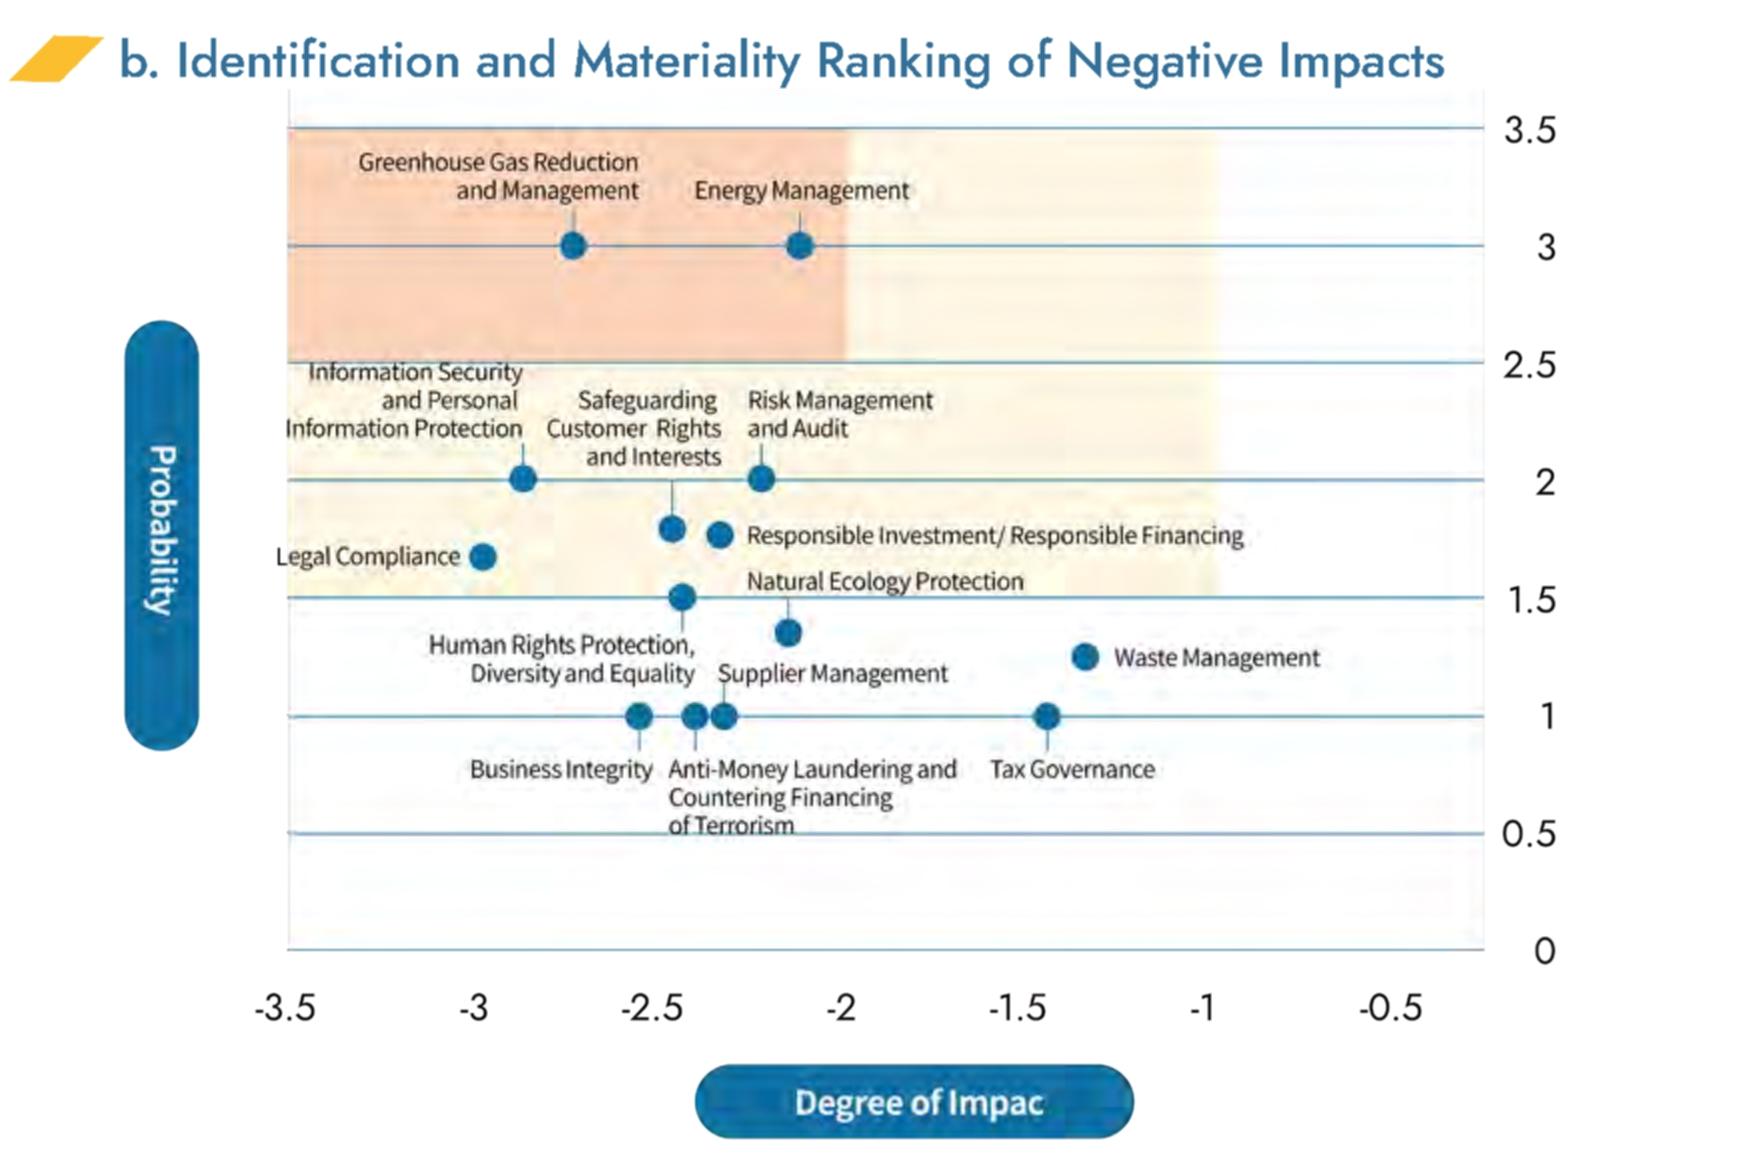 Identification and Materiality Ranking of Negative Impacts